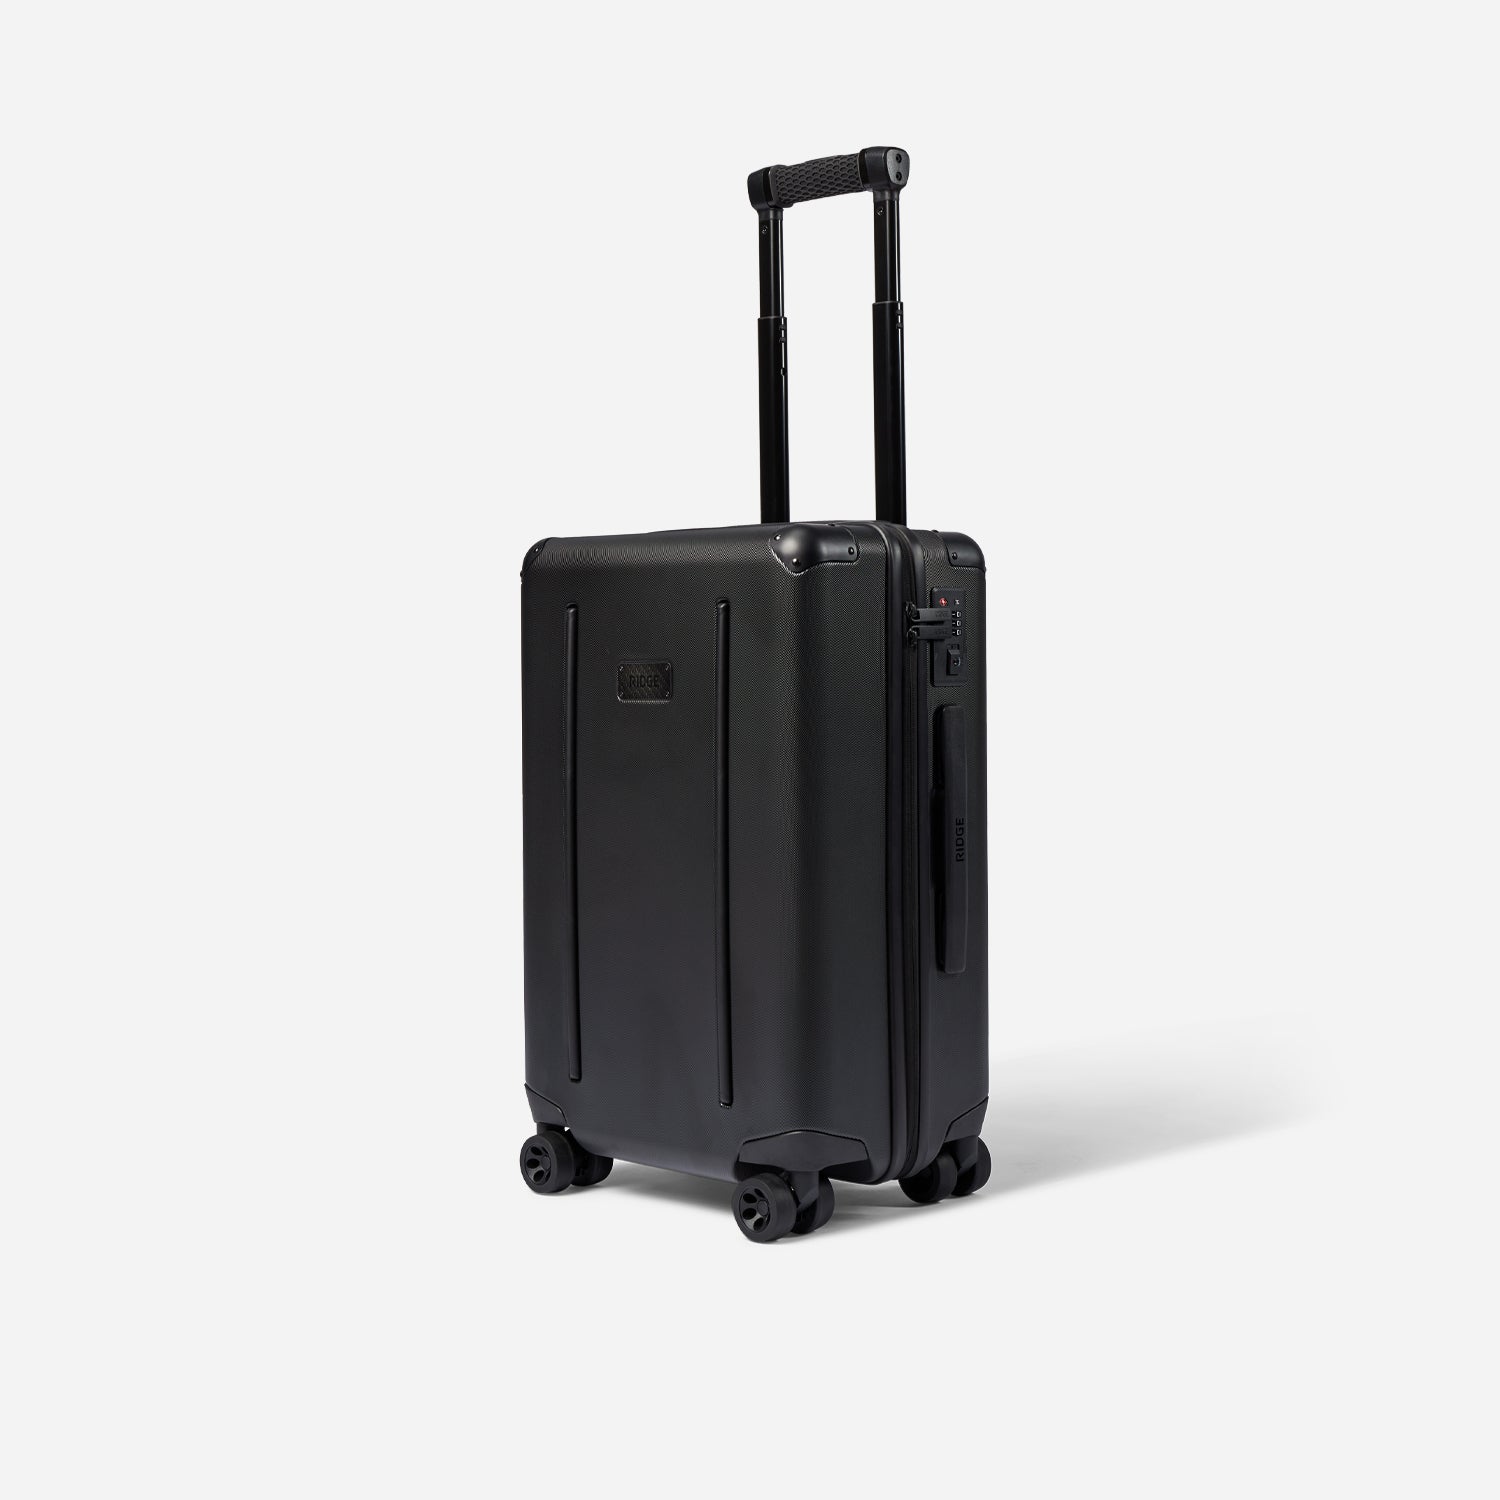 Smart Luggage Features: Double Coil Zippers